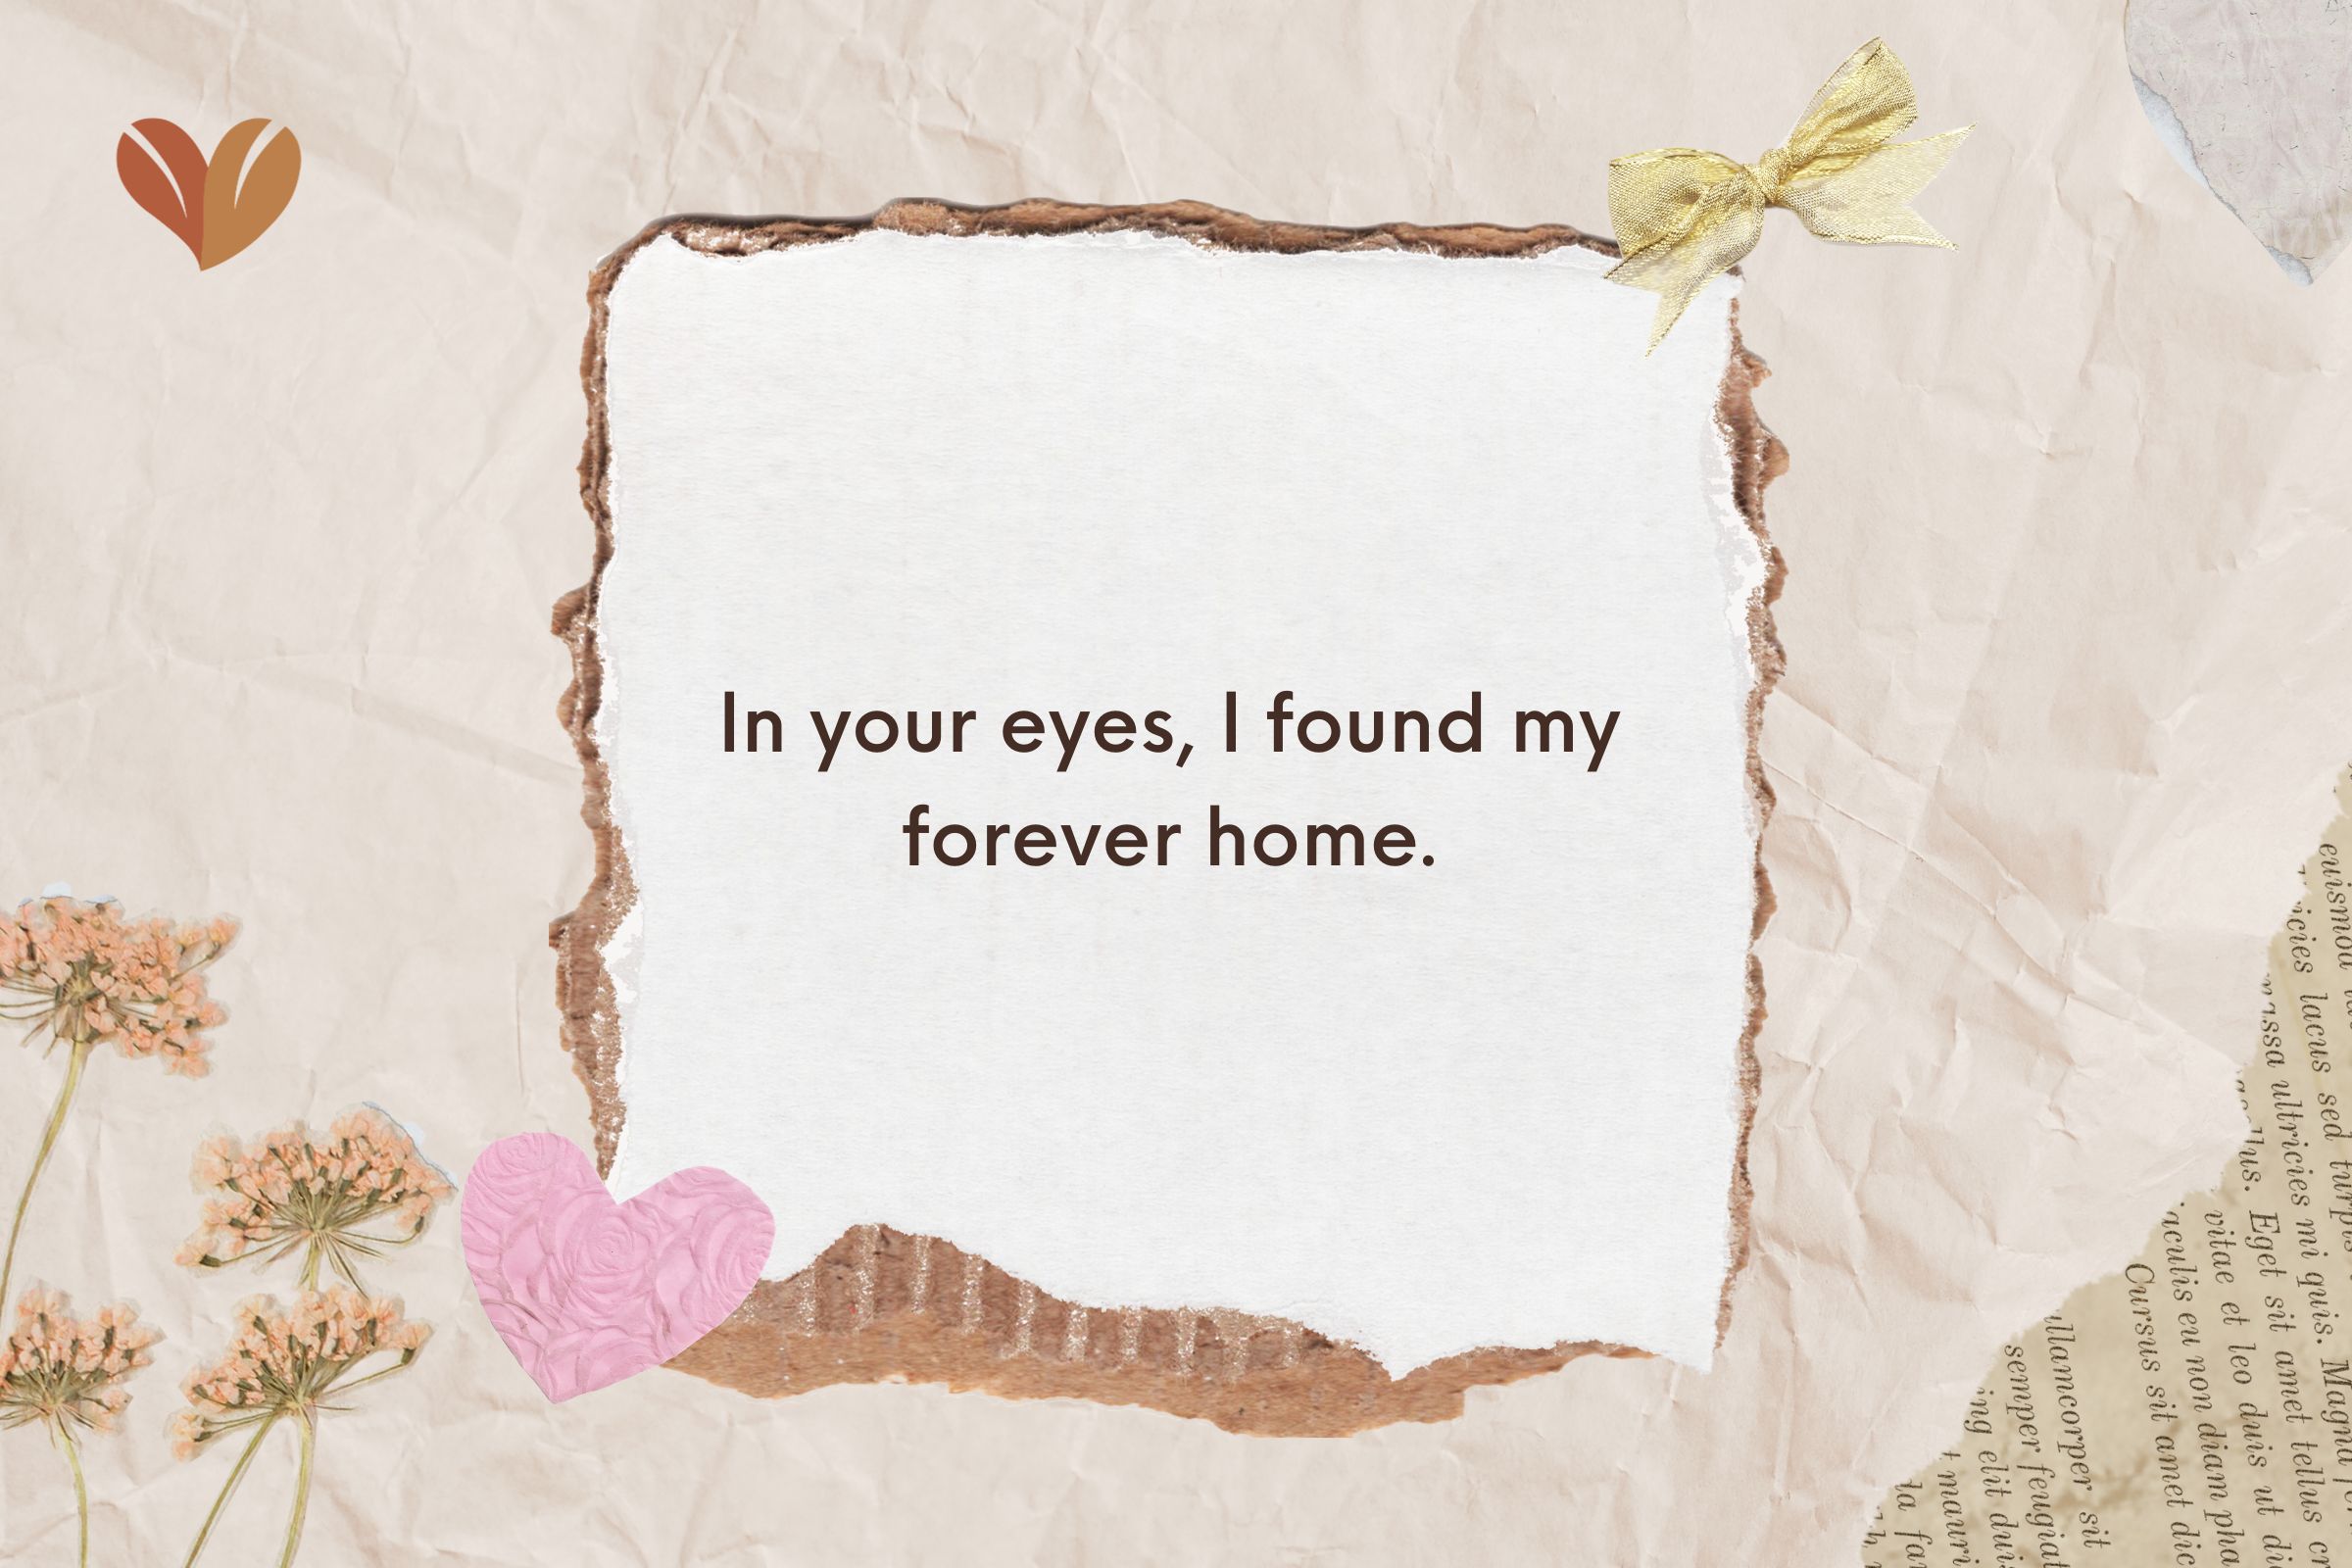 In your eyes, I found my forever home.